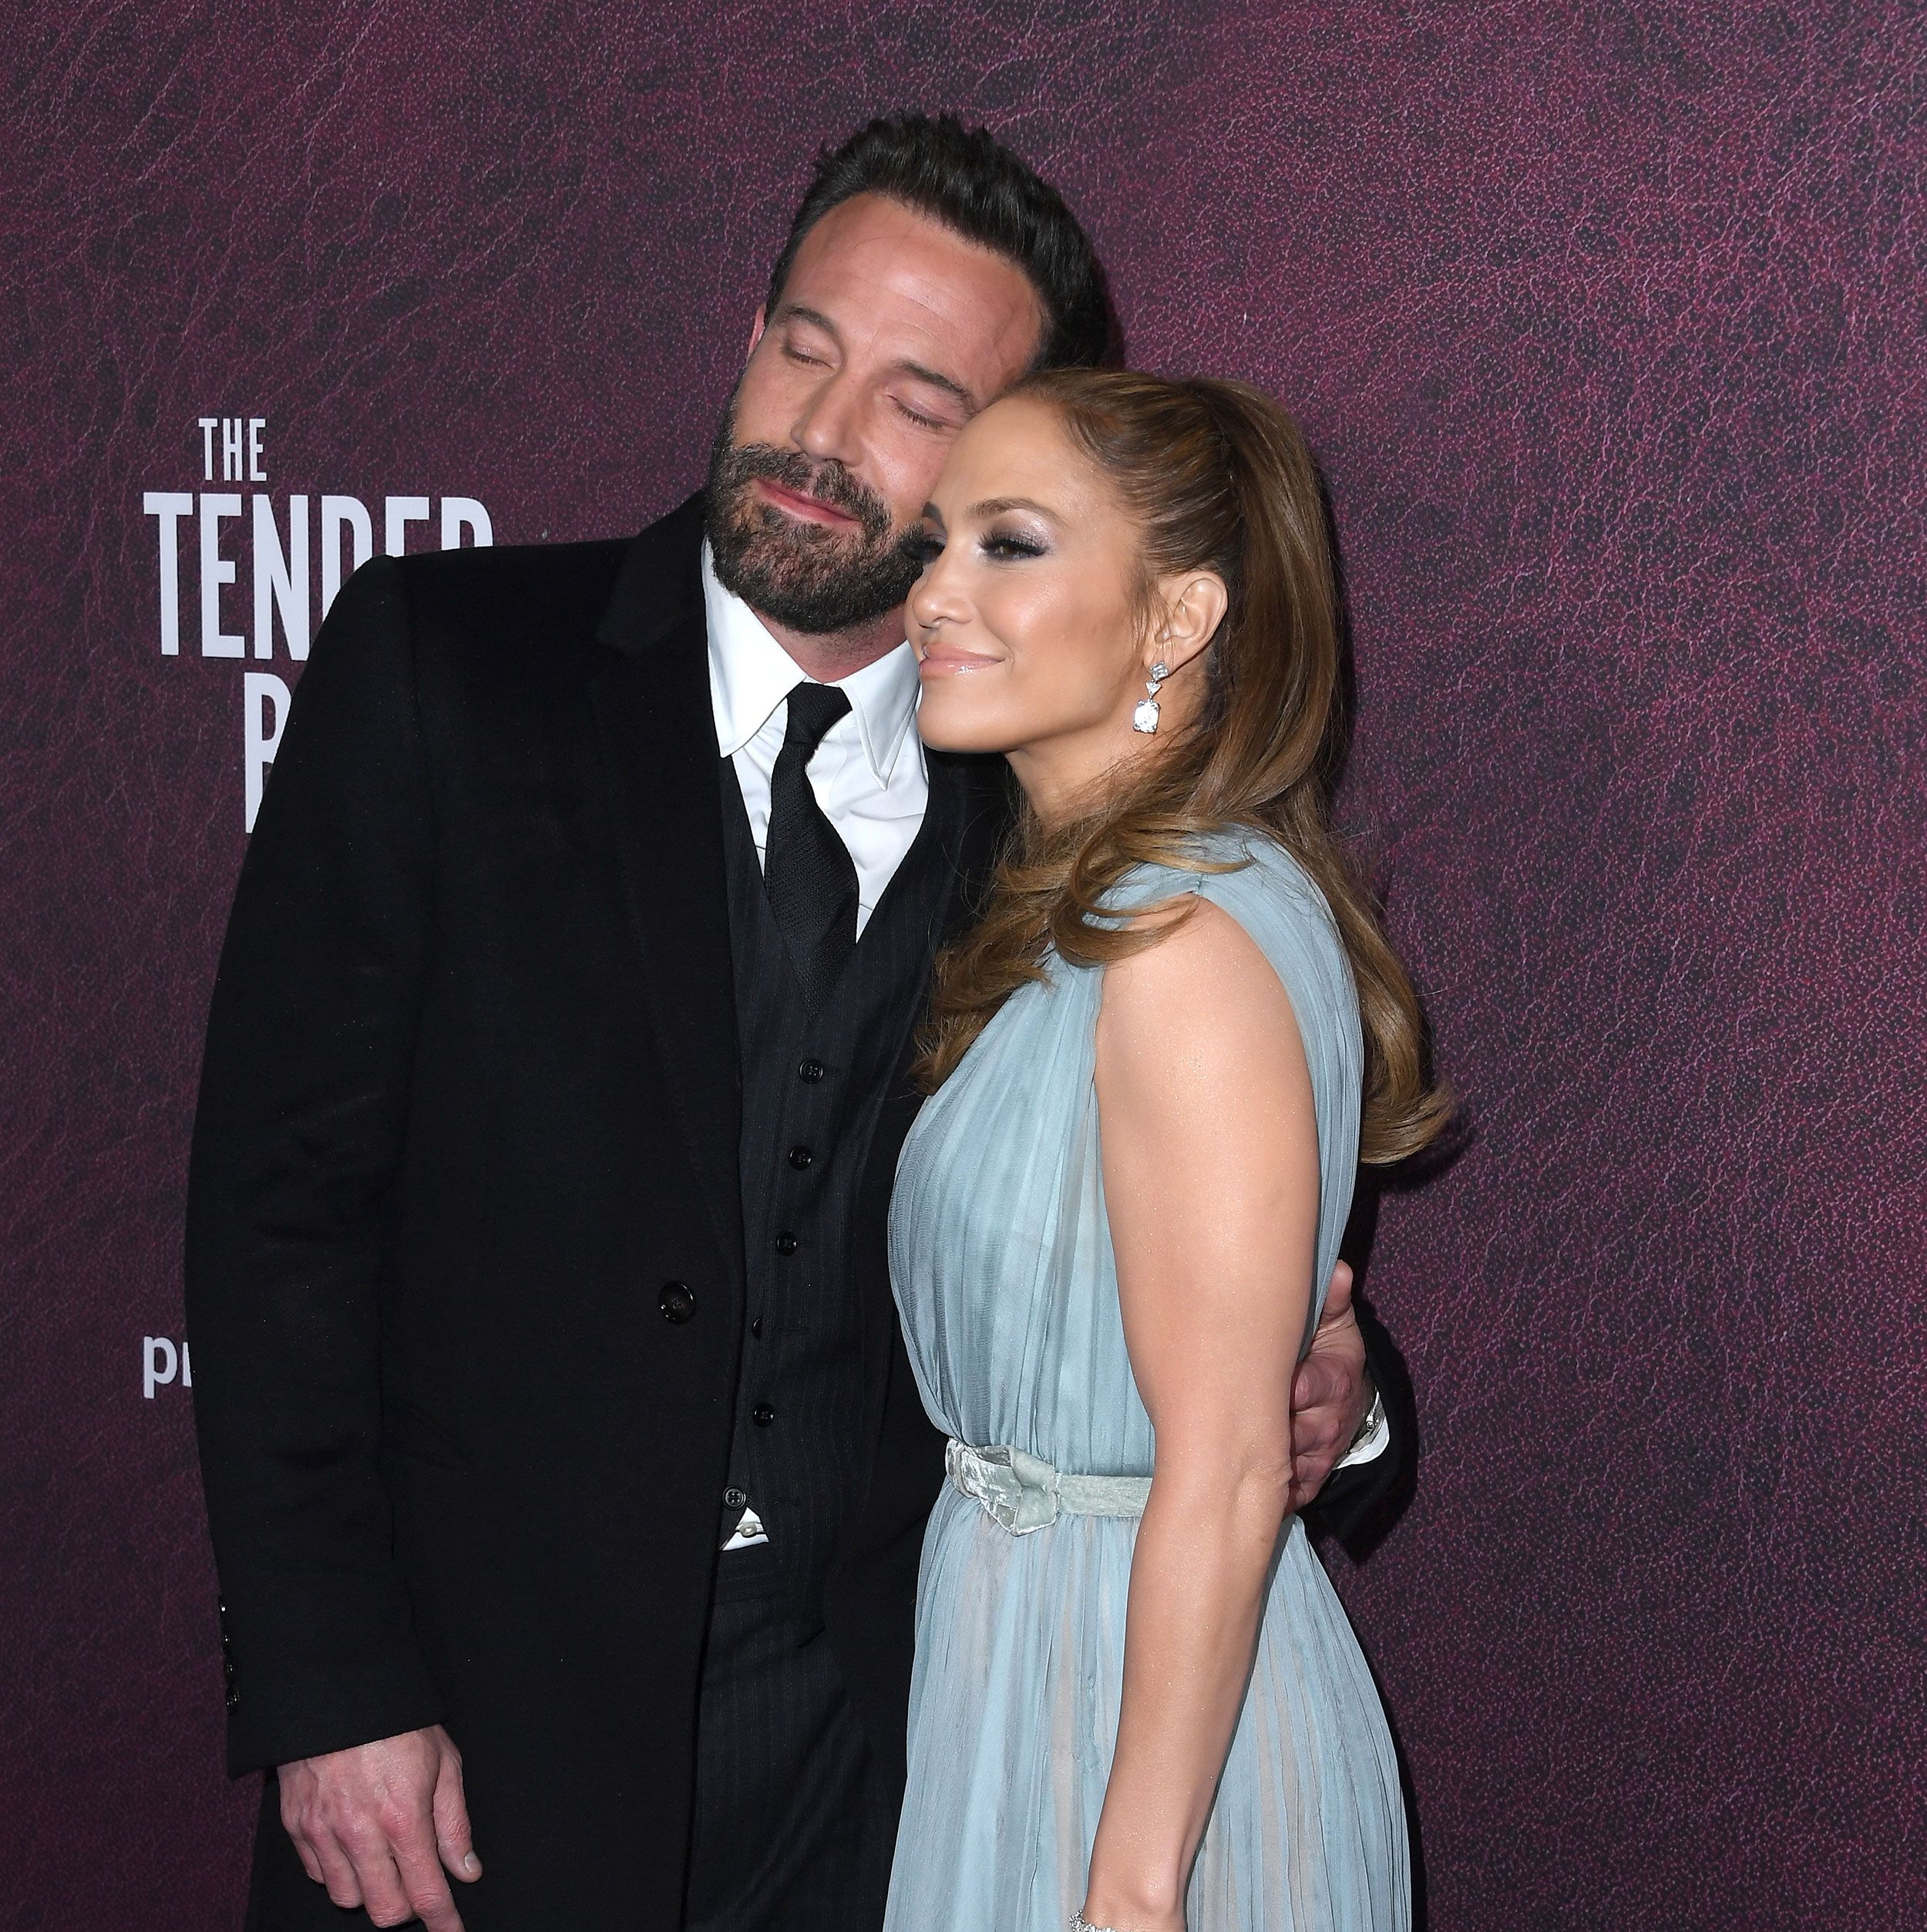 Jennifer Lopez Shares the First Photo of Her Wedding Ring After Marrying Ben Affleck